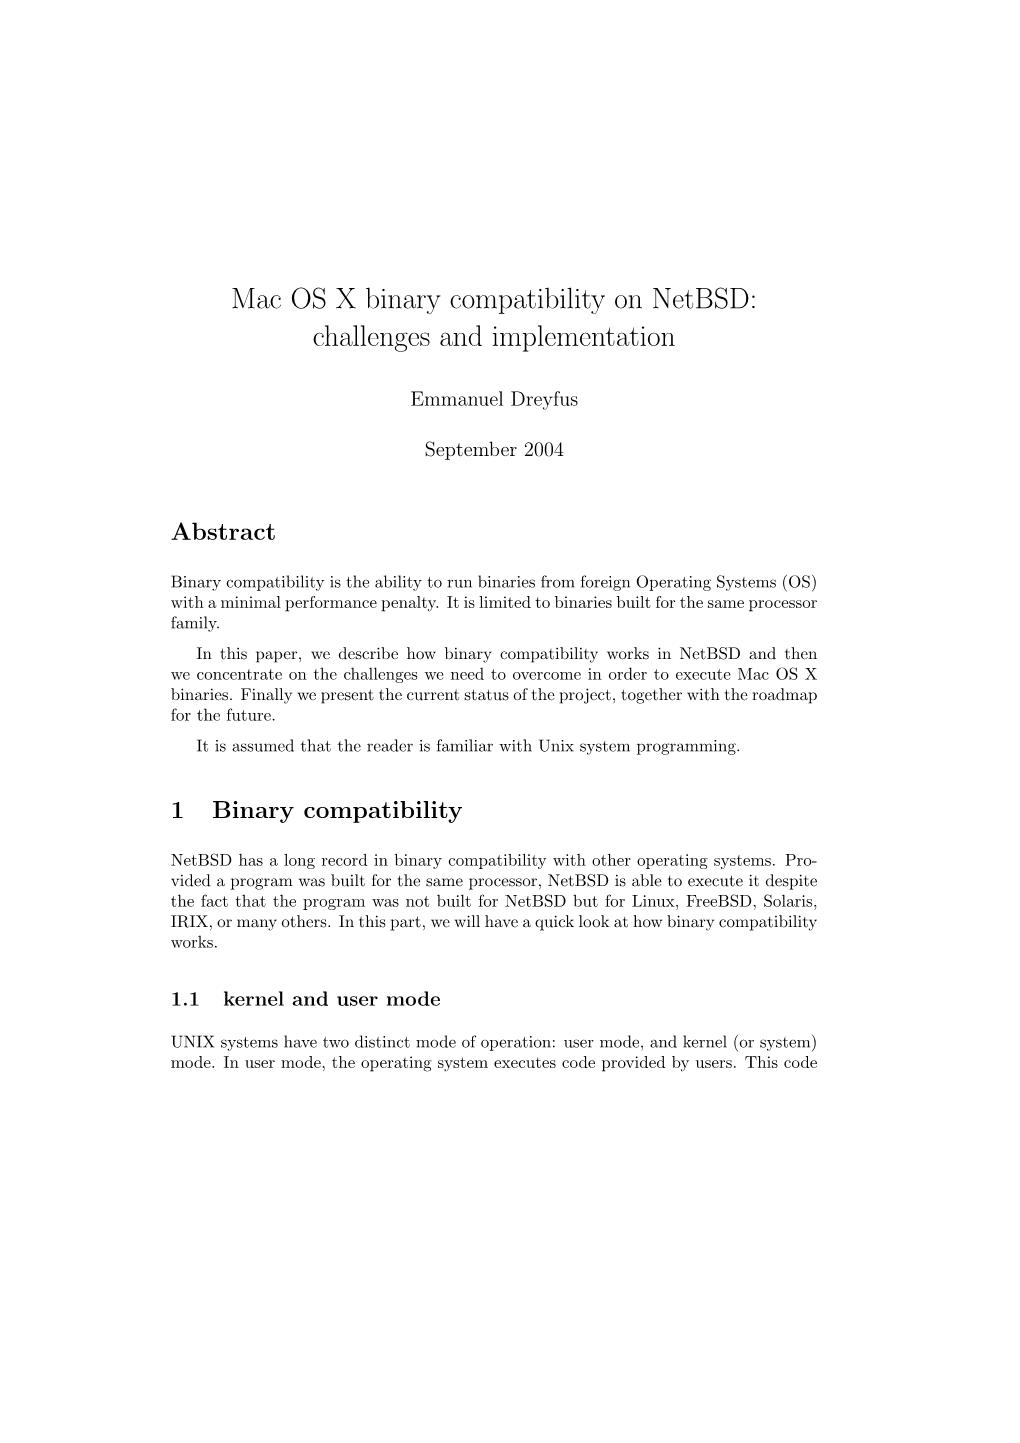 Mac OS X Binary Compatibility on Netbsd: Challenges and Implementation